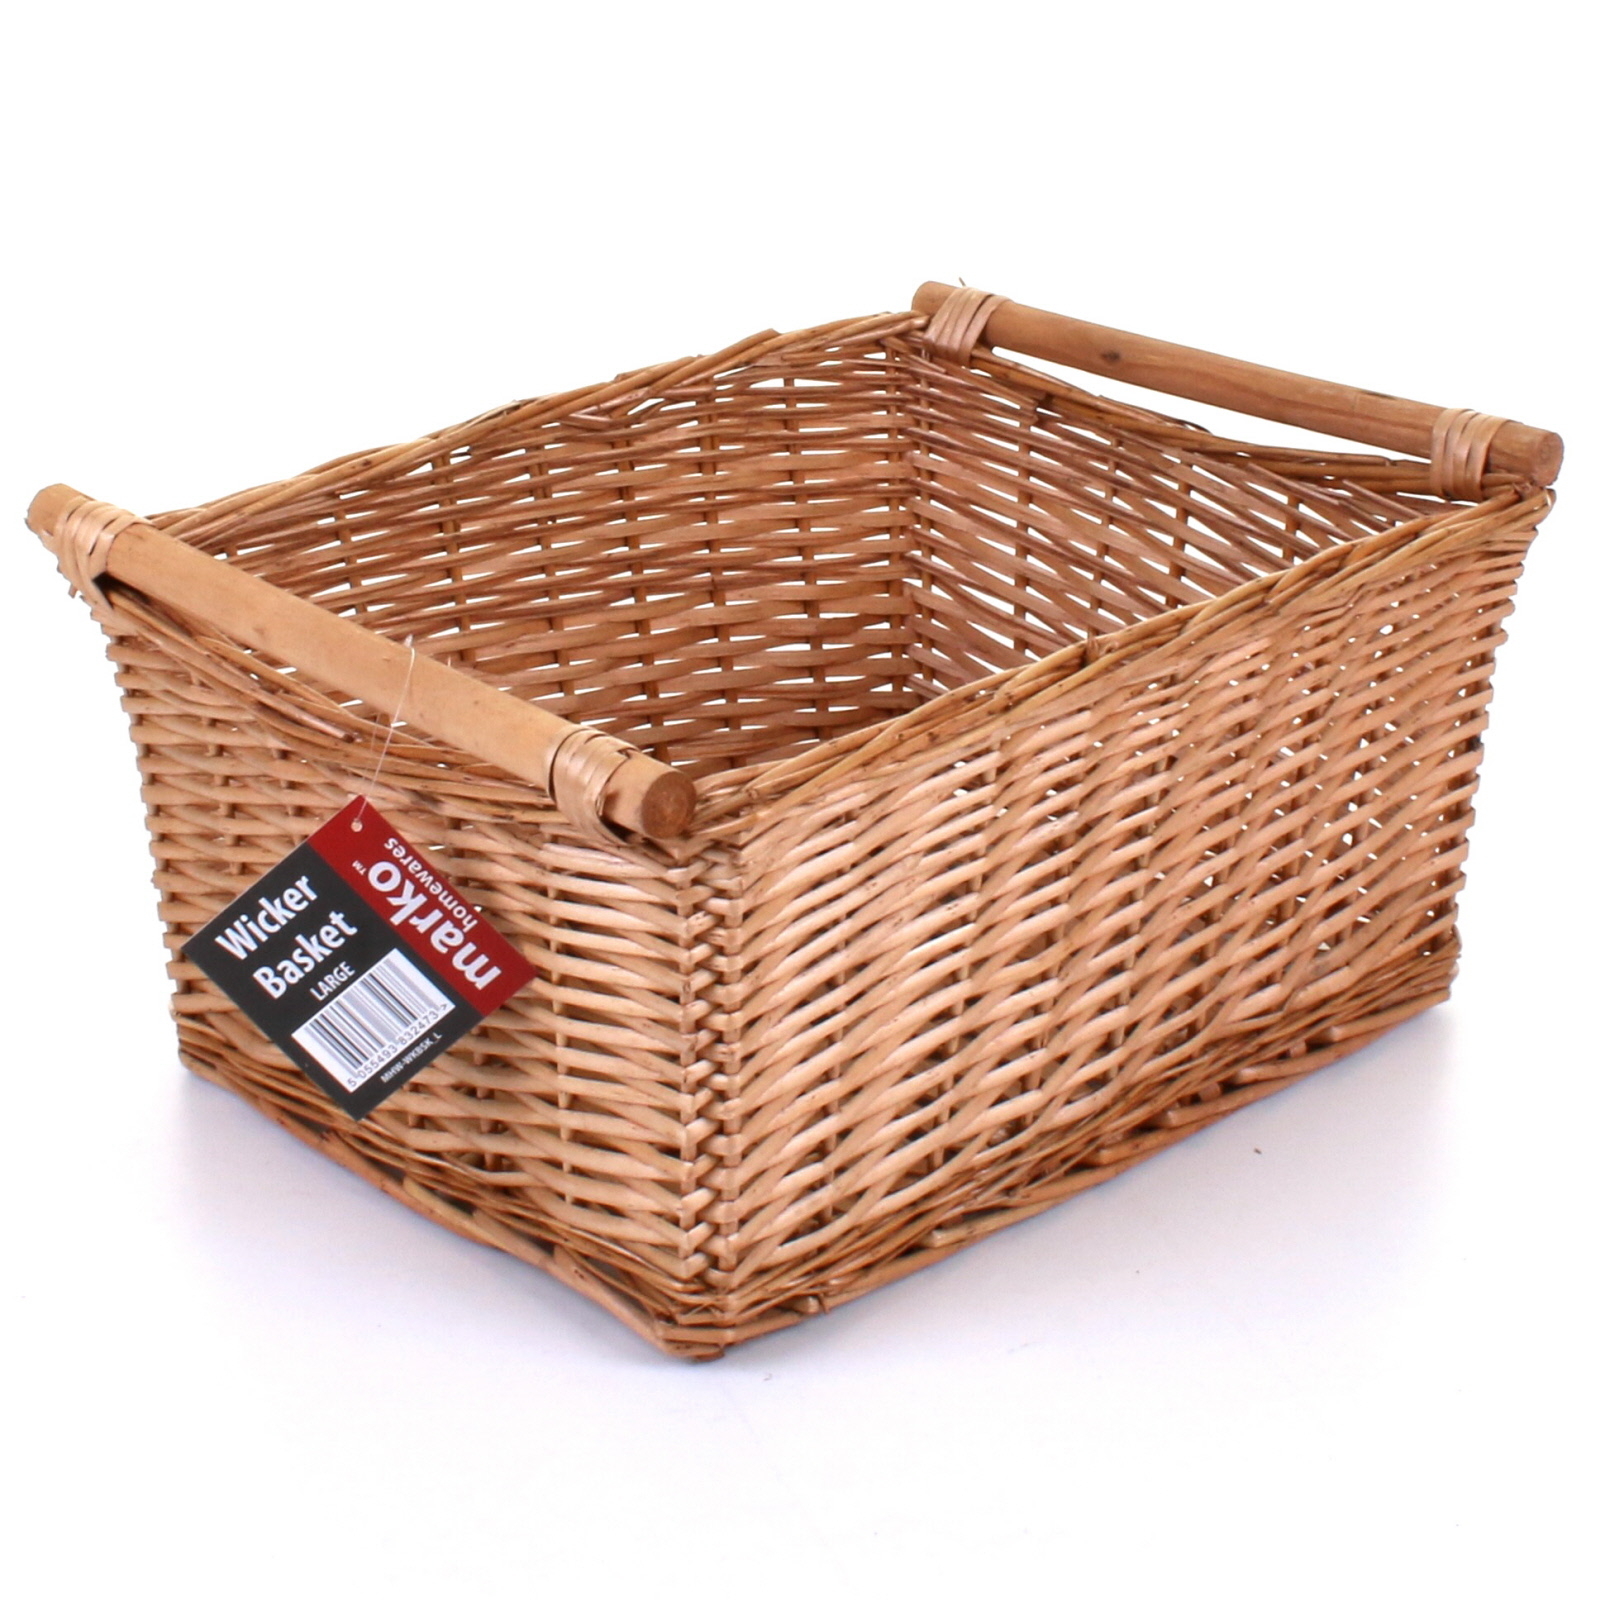 Wicker Baskets With Handles You Ll Love In 2021 Visualhunt